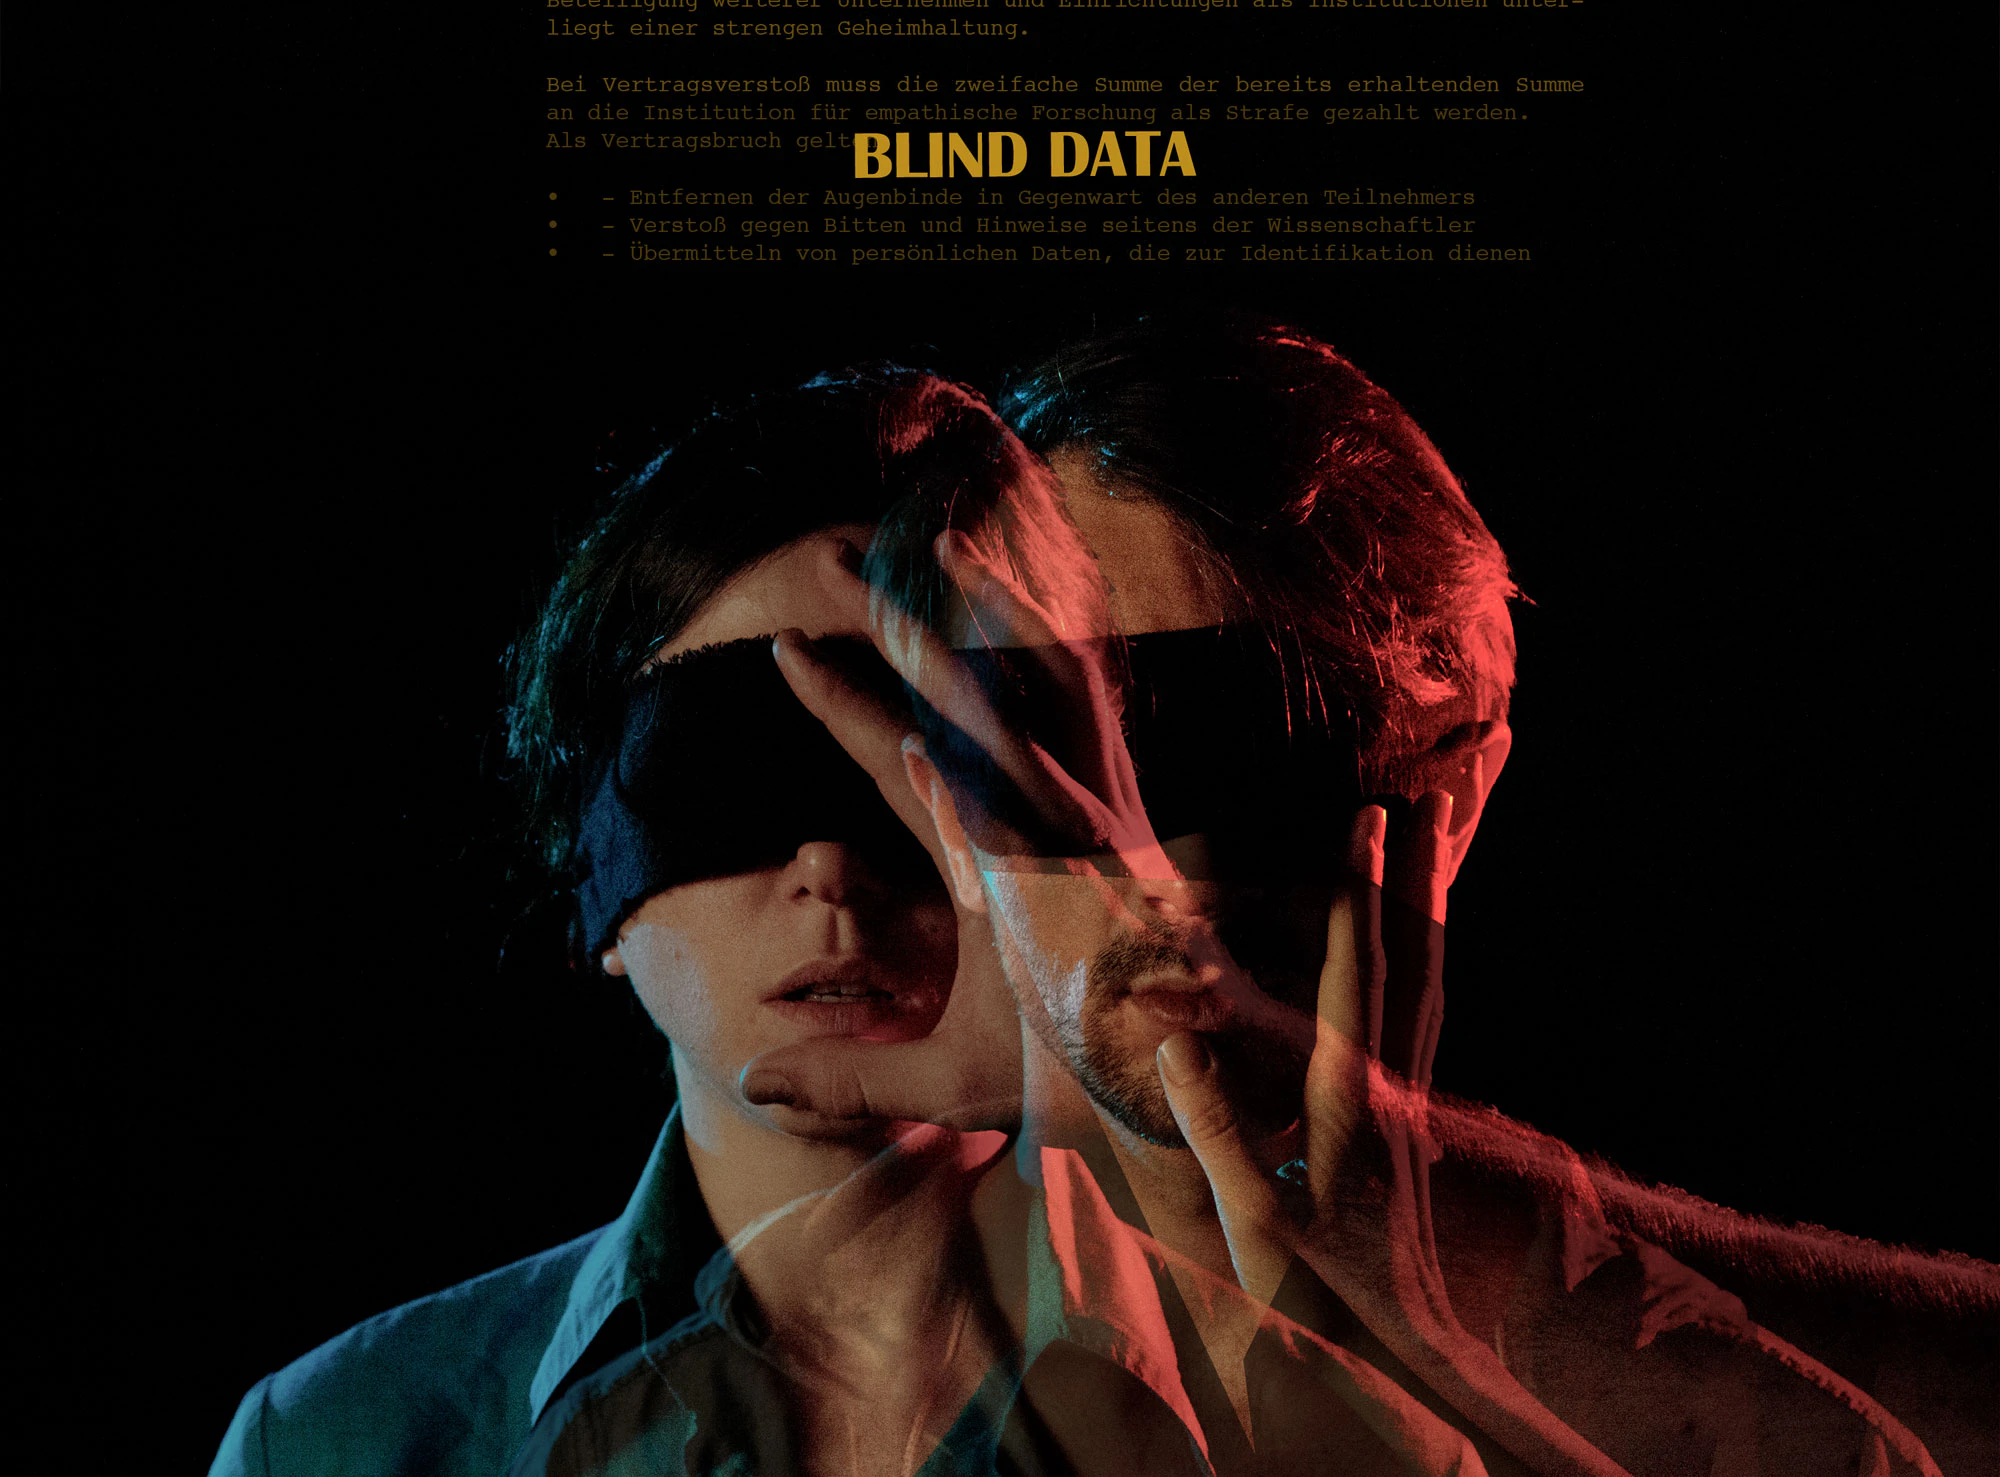 Blind Data - A experiment